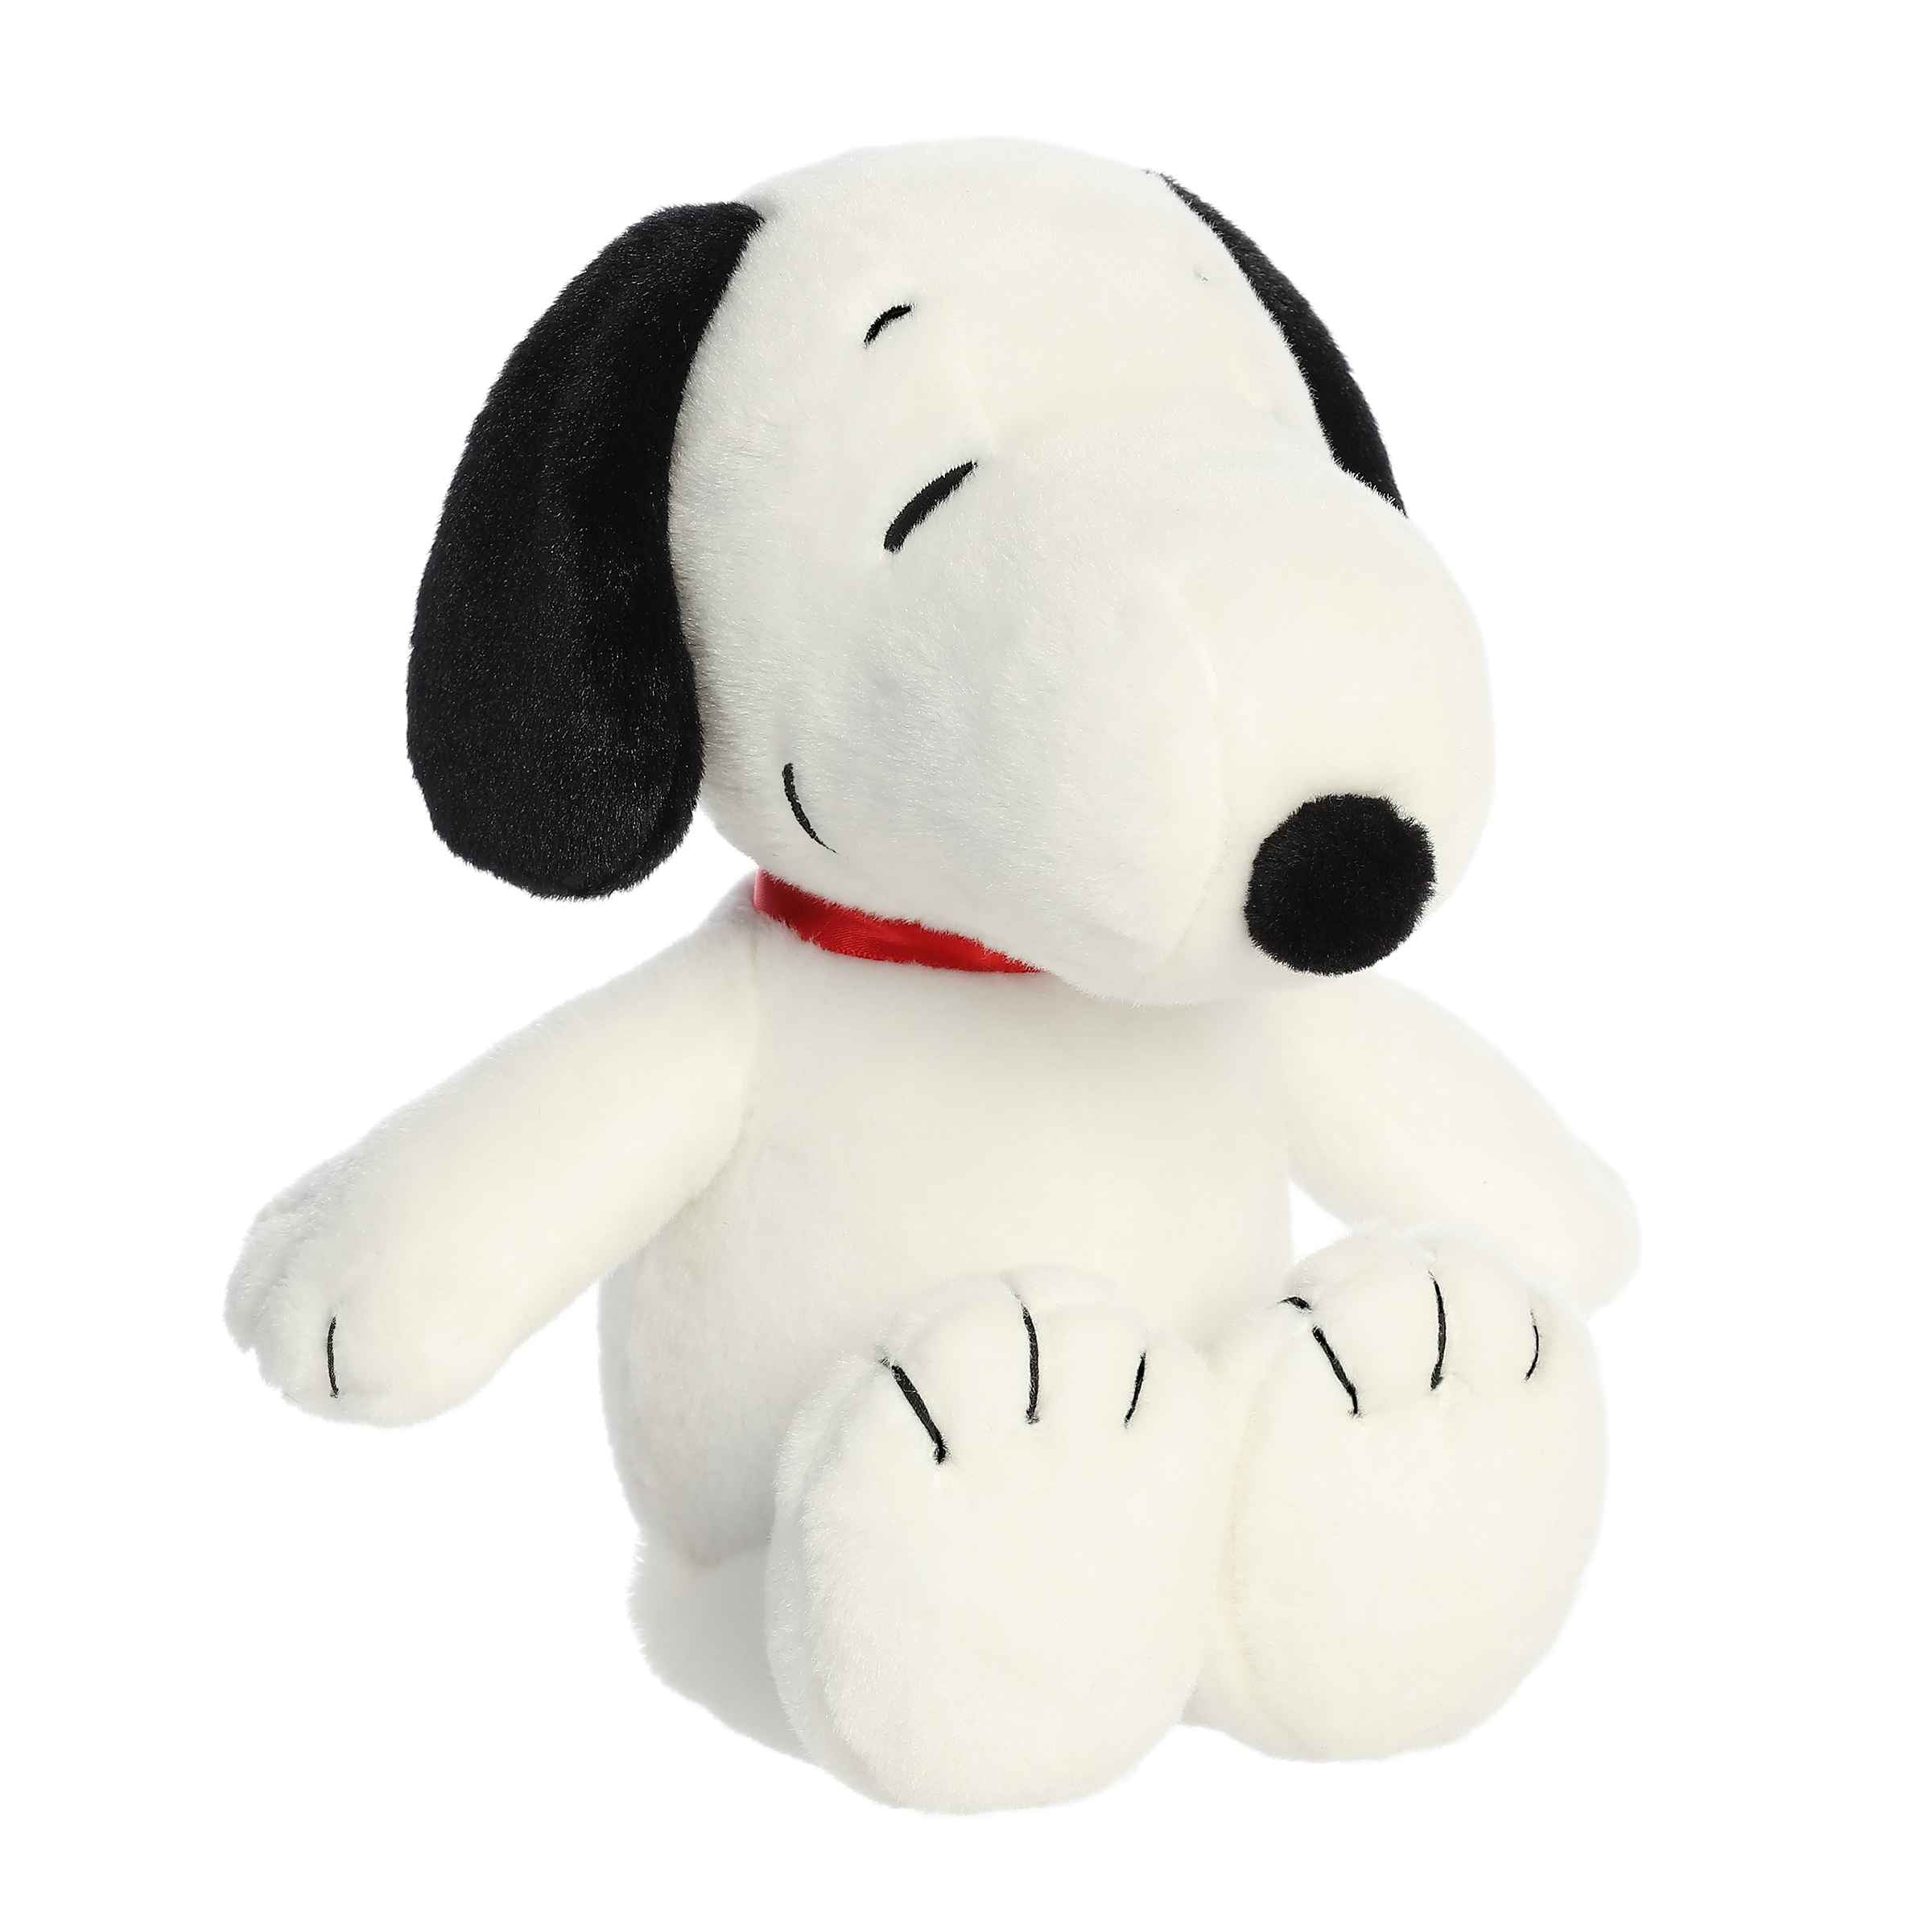 12-inch Snoopy plush in the Peanuts plush collection by Aurora, detailed and durable, white fur resembling beagle puppy plush